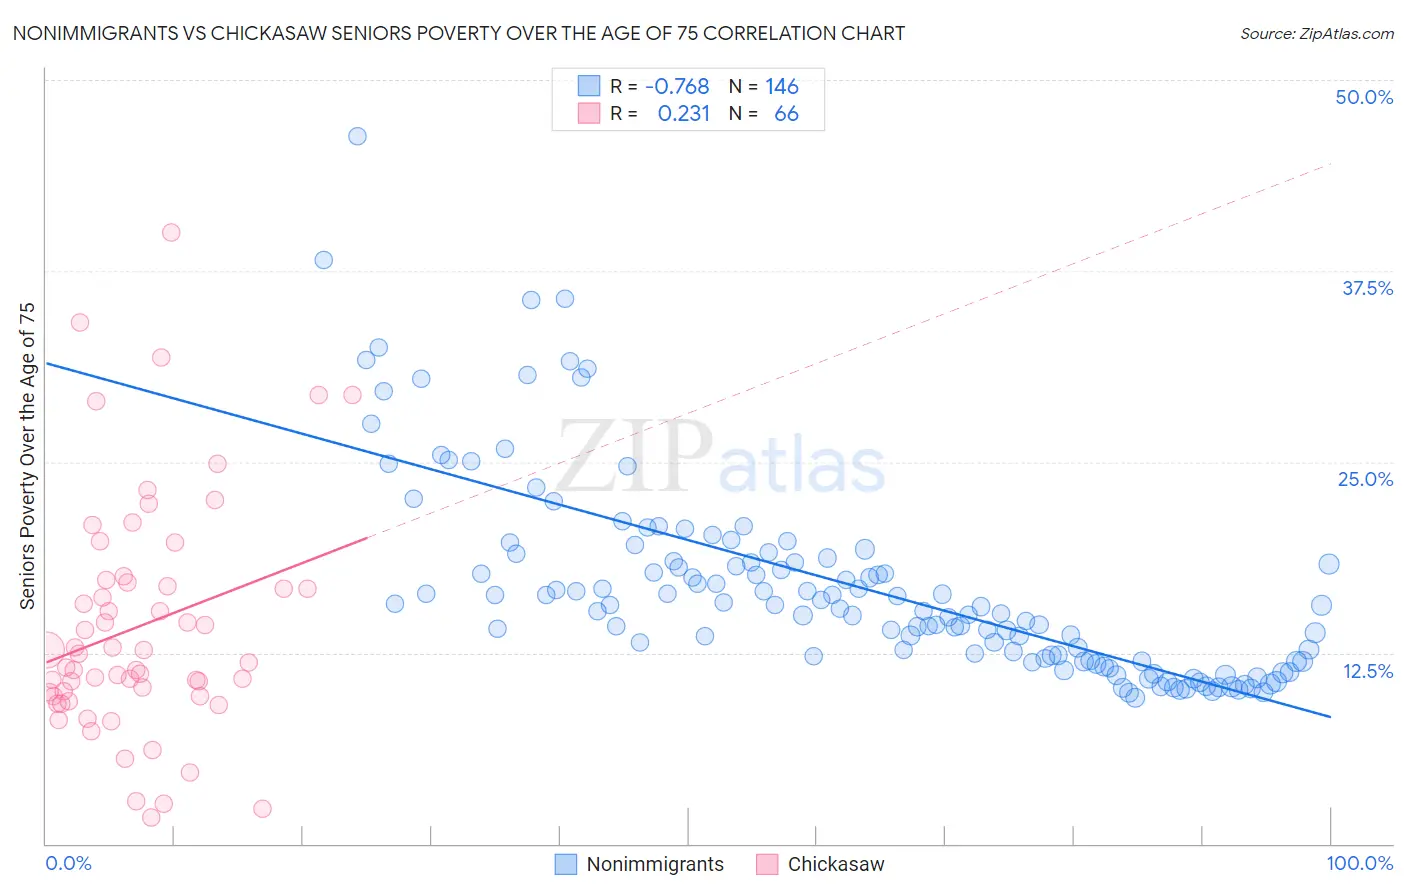 Nonimmigrants vs Chickasaw Seniors Poverty Over the Age of 75